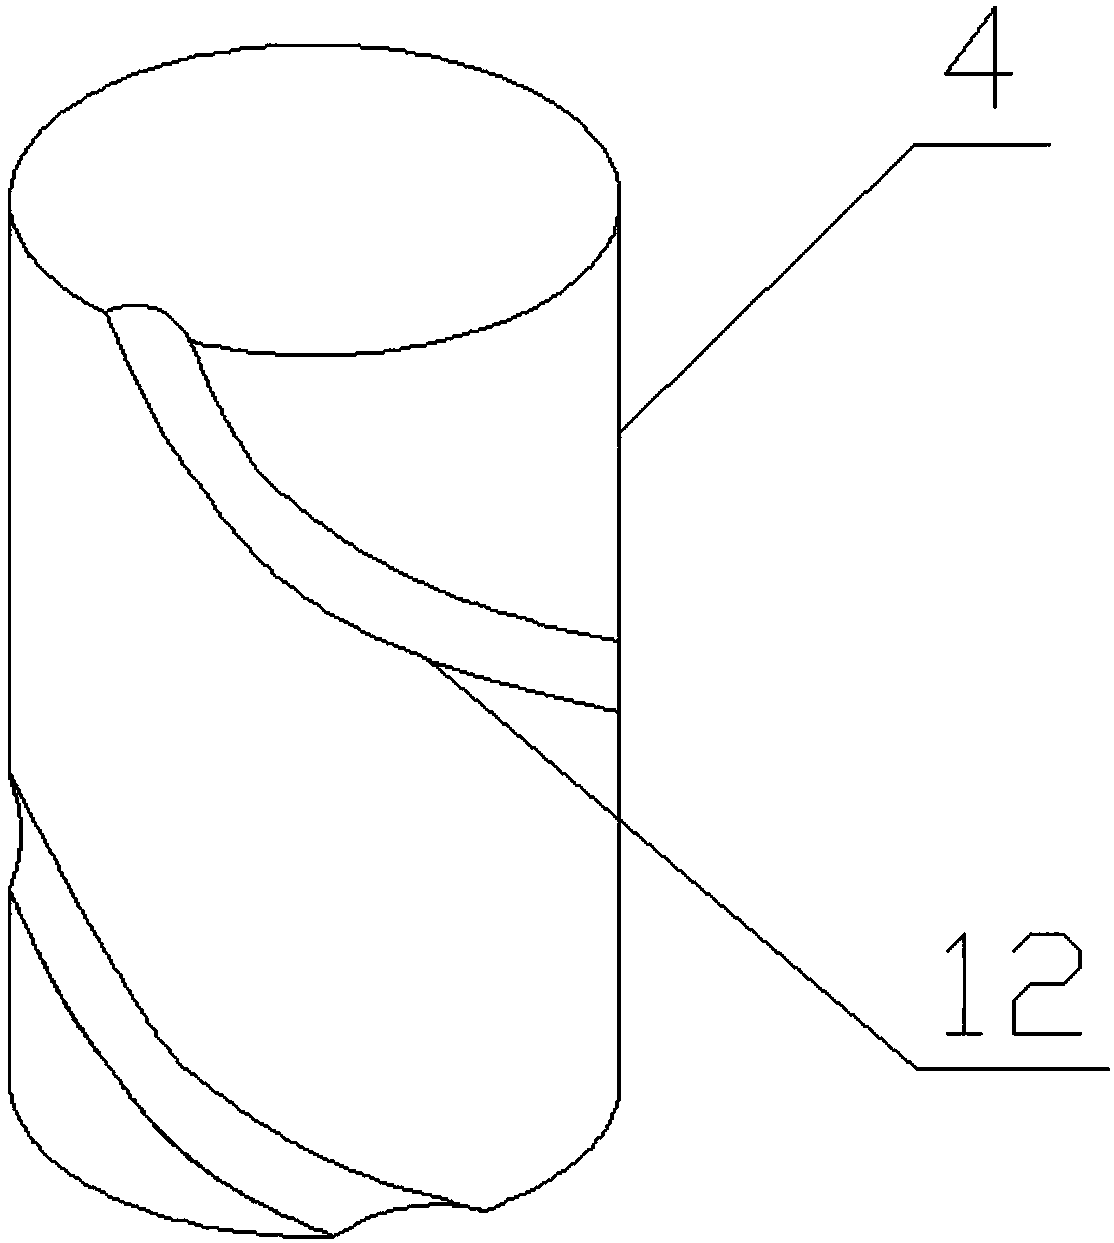 Automatic water draining type well cover